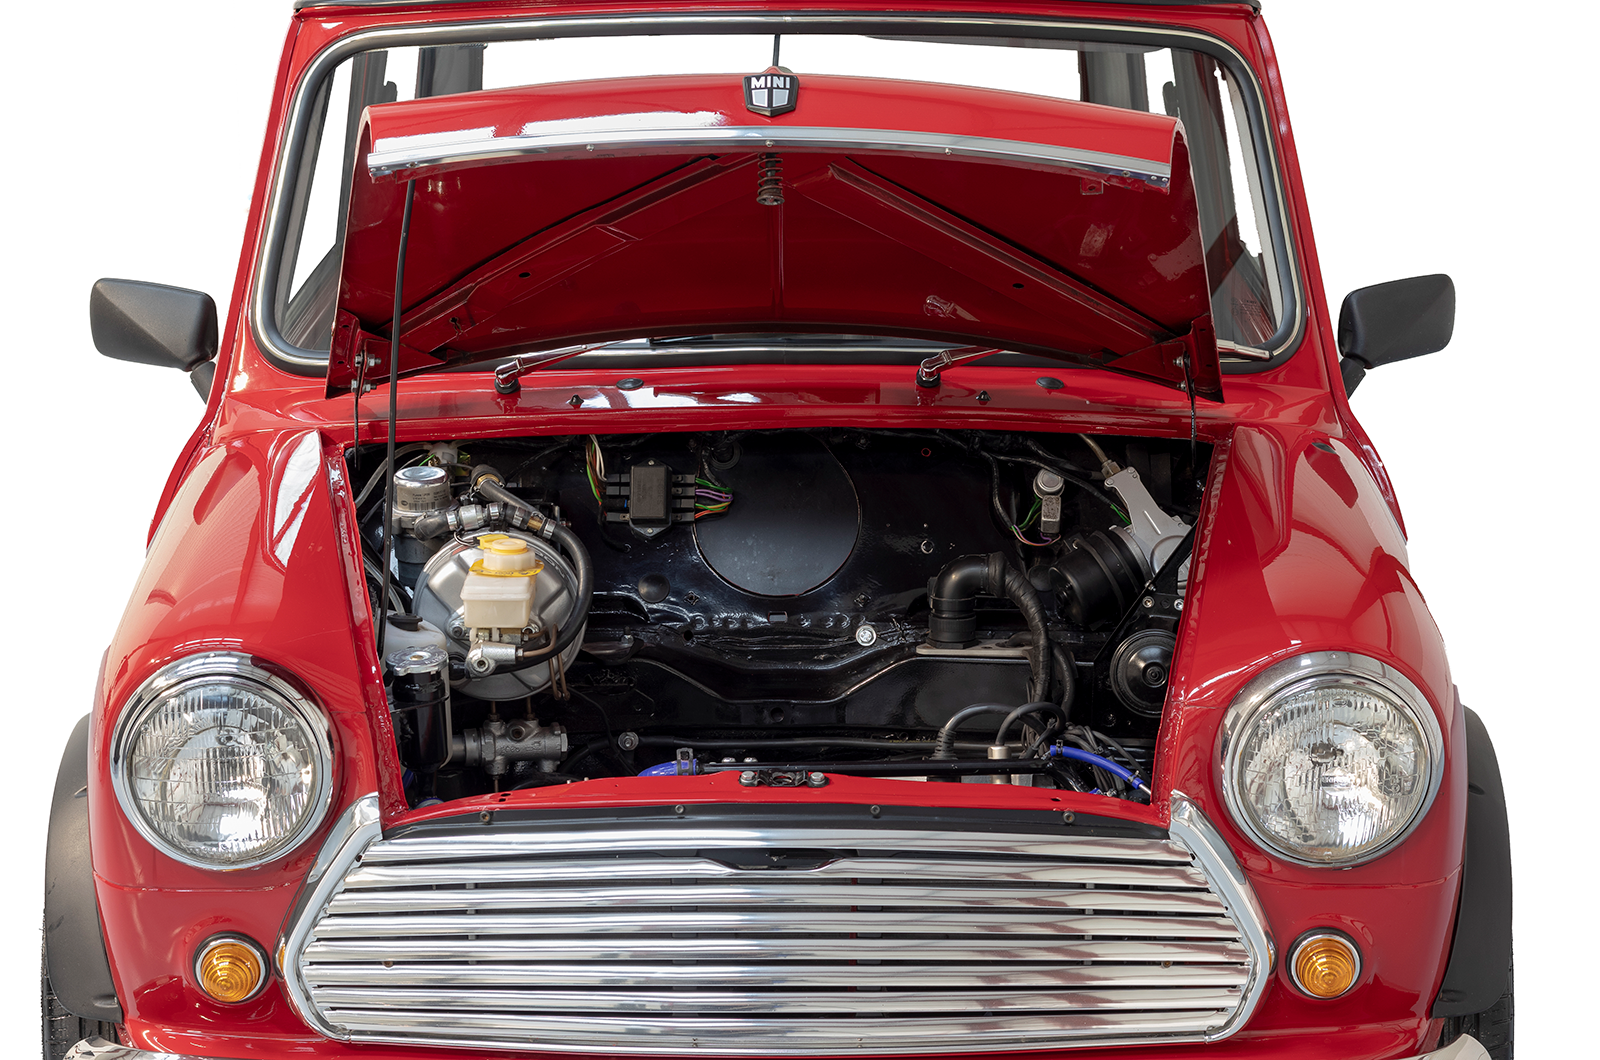 You can now buy a classic Mini with an electric engine